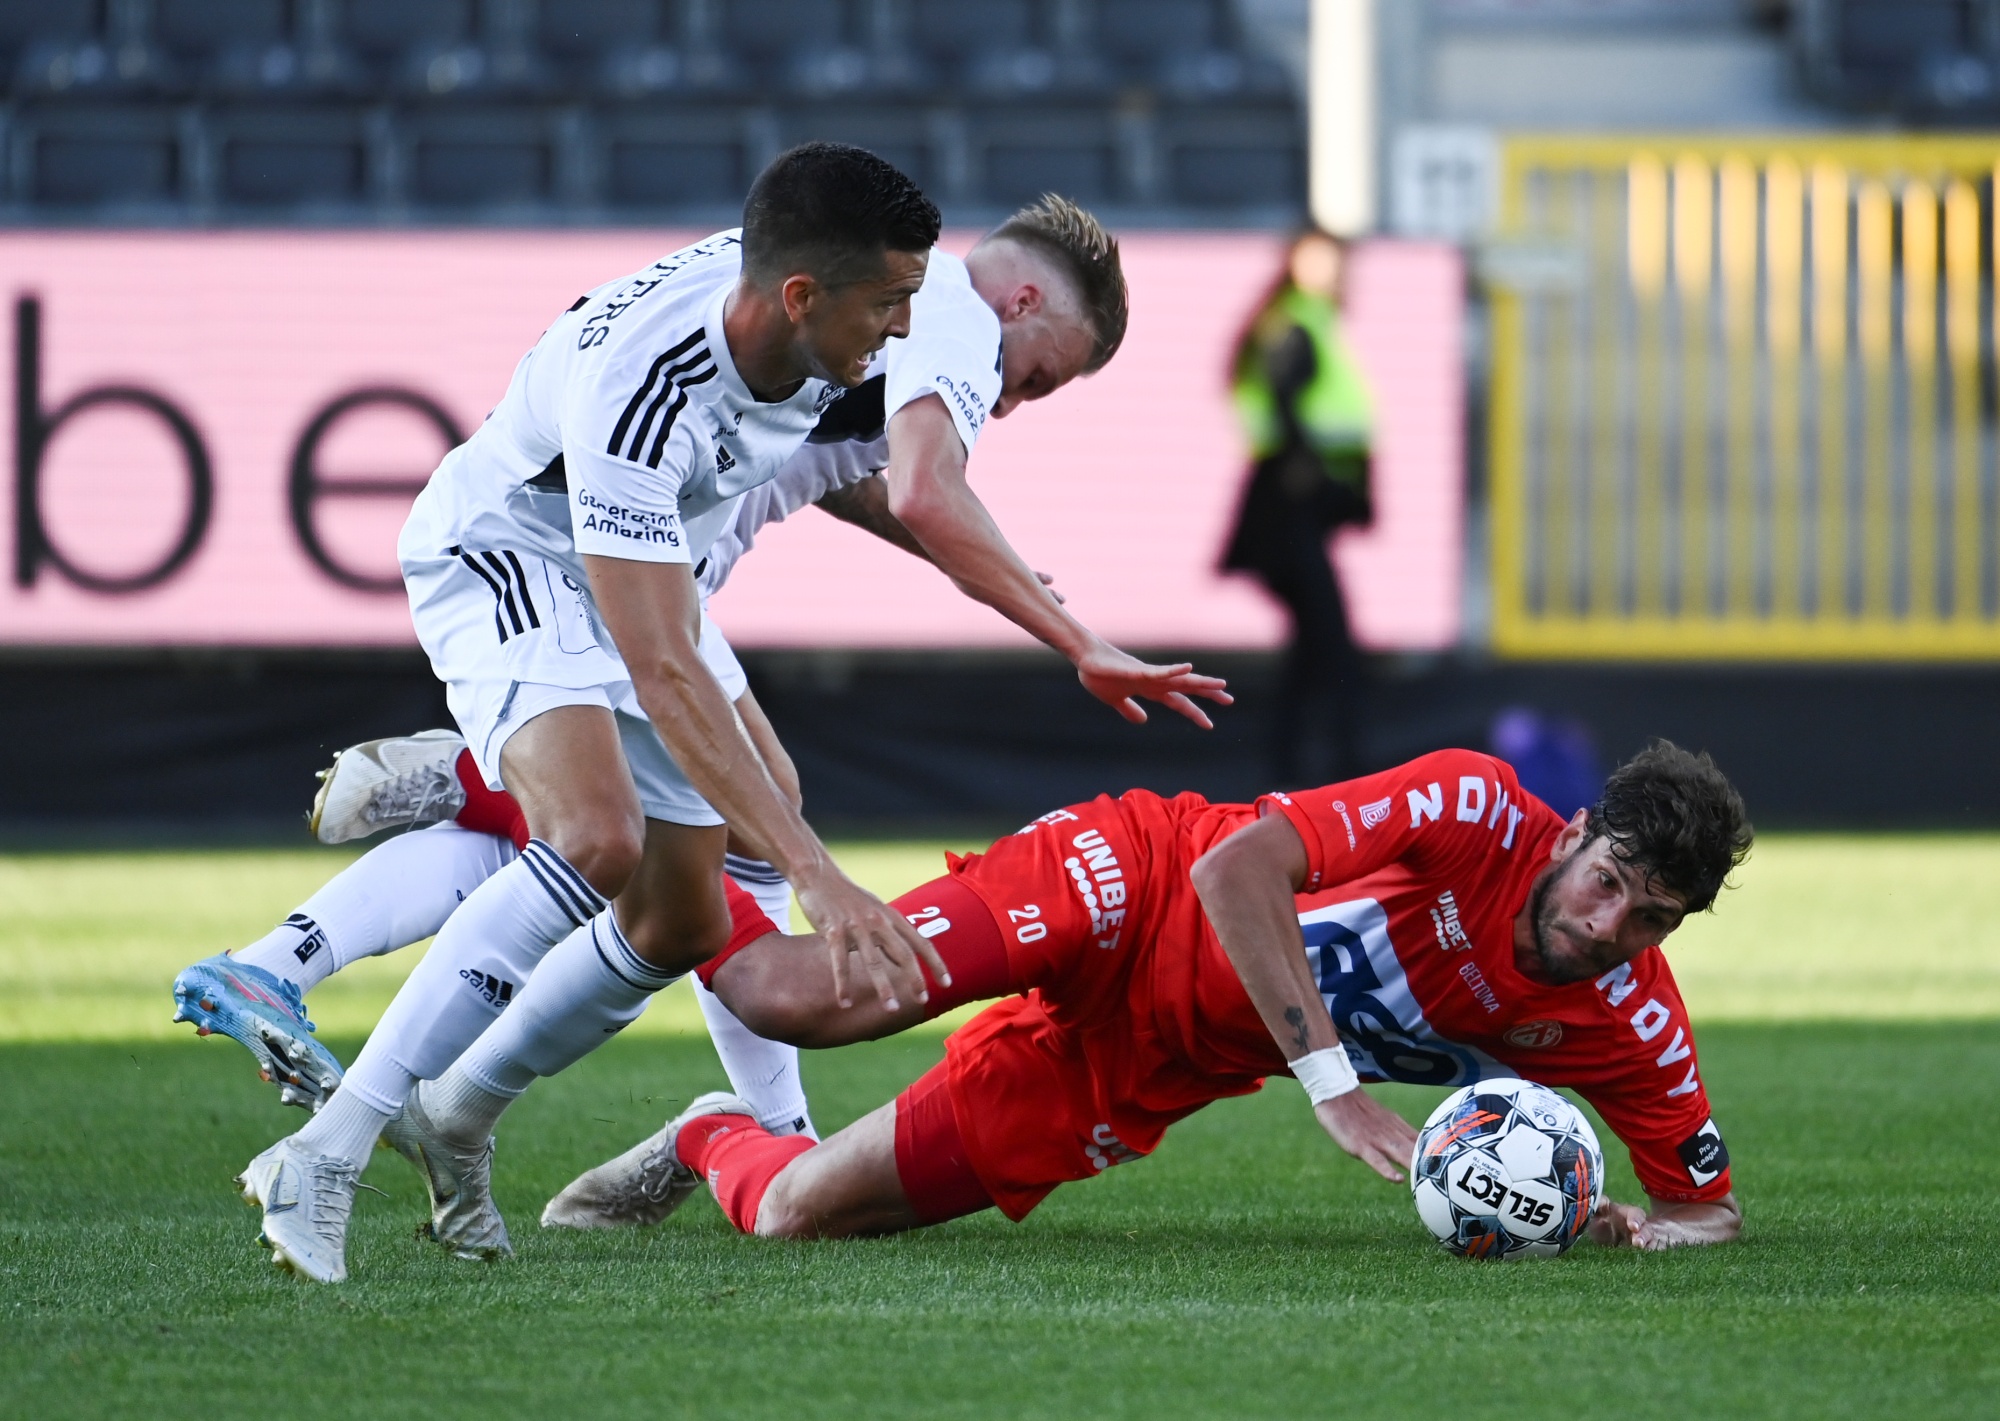 Eupen's Stef Peeters and Kortrijk's Felipe Avenatti fight for the ball during a soccer match between KAS Eupen and KV Kortrijk, Saturday 03 September 2022 in Eupen, on day 7 of the 2022-2023 'Jupiler Pro League' first division of the Belgian championship. BELGA PHOTO JOHN THYS